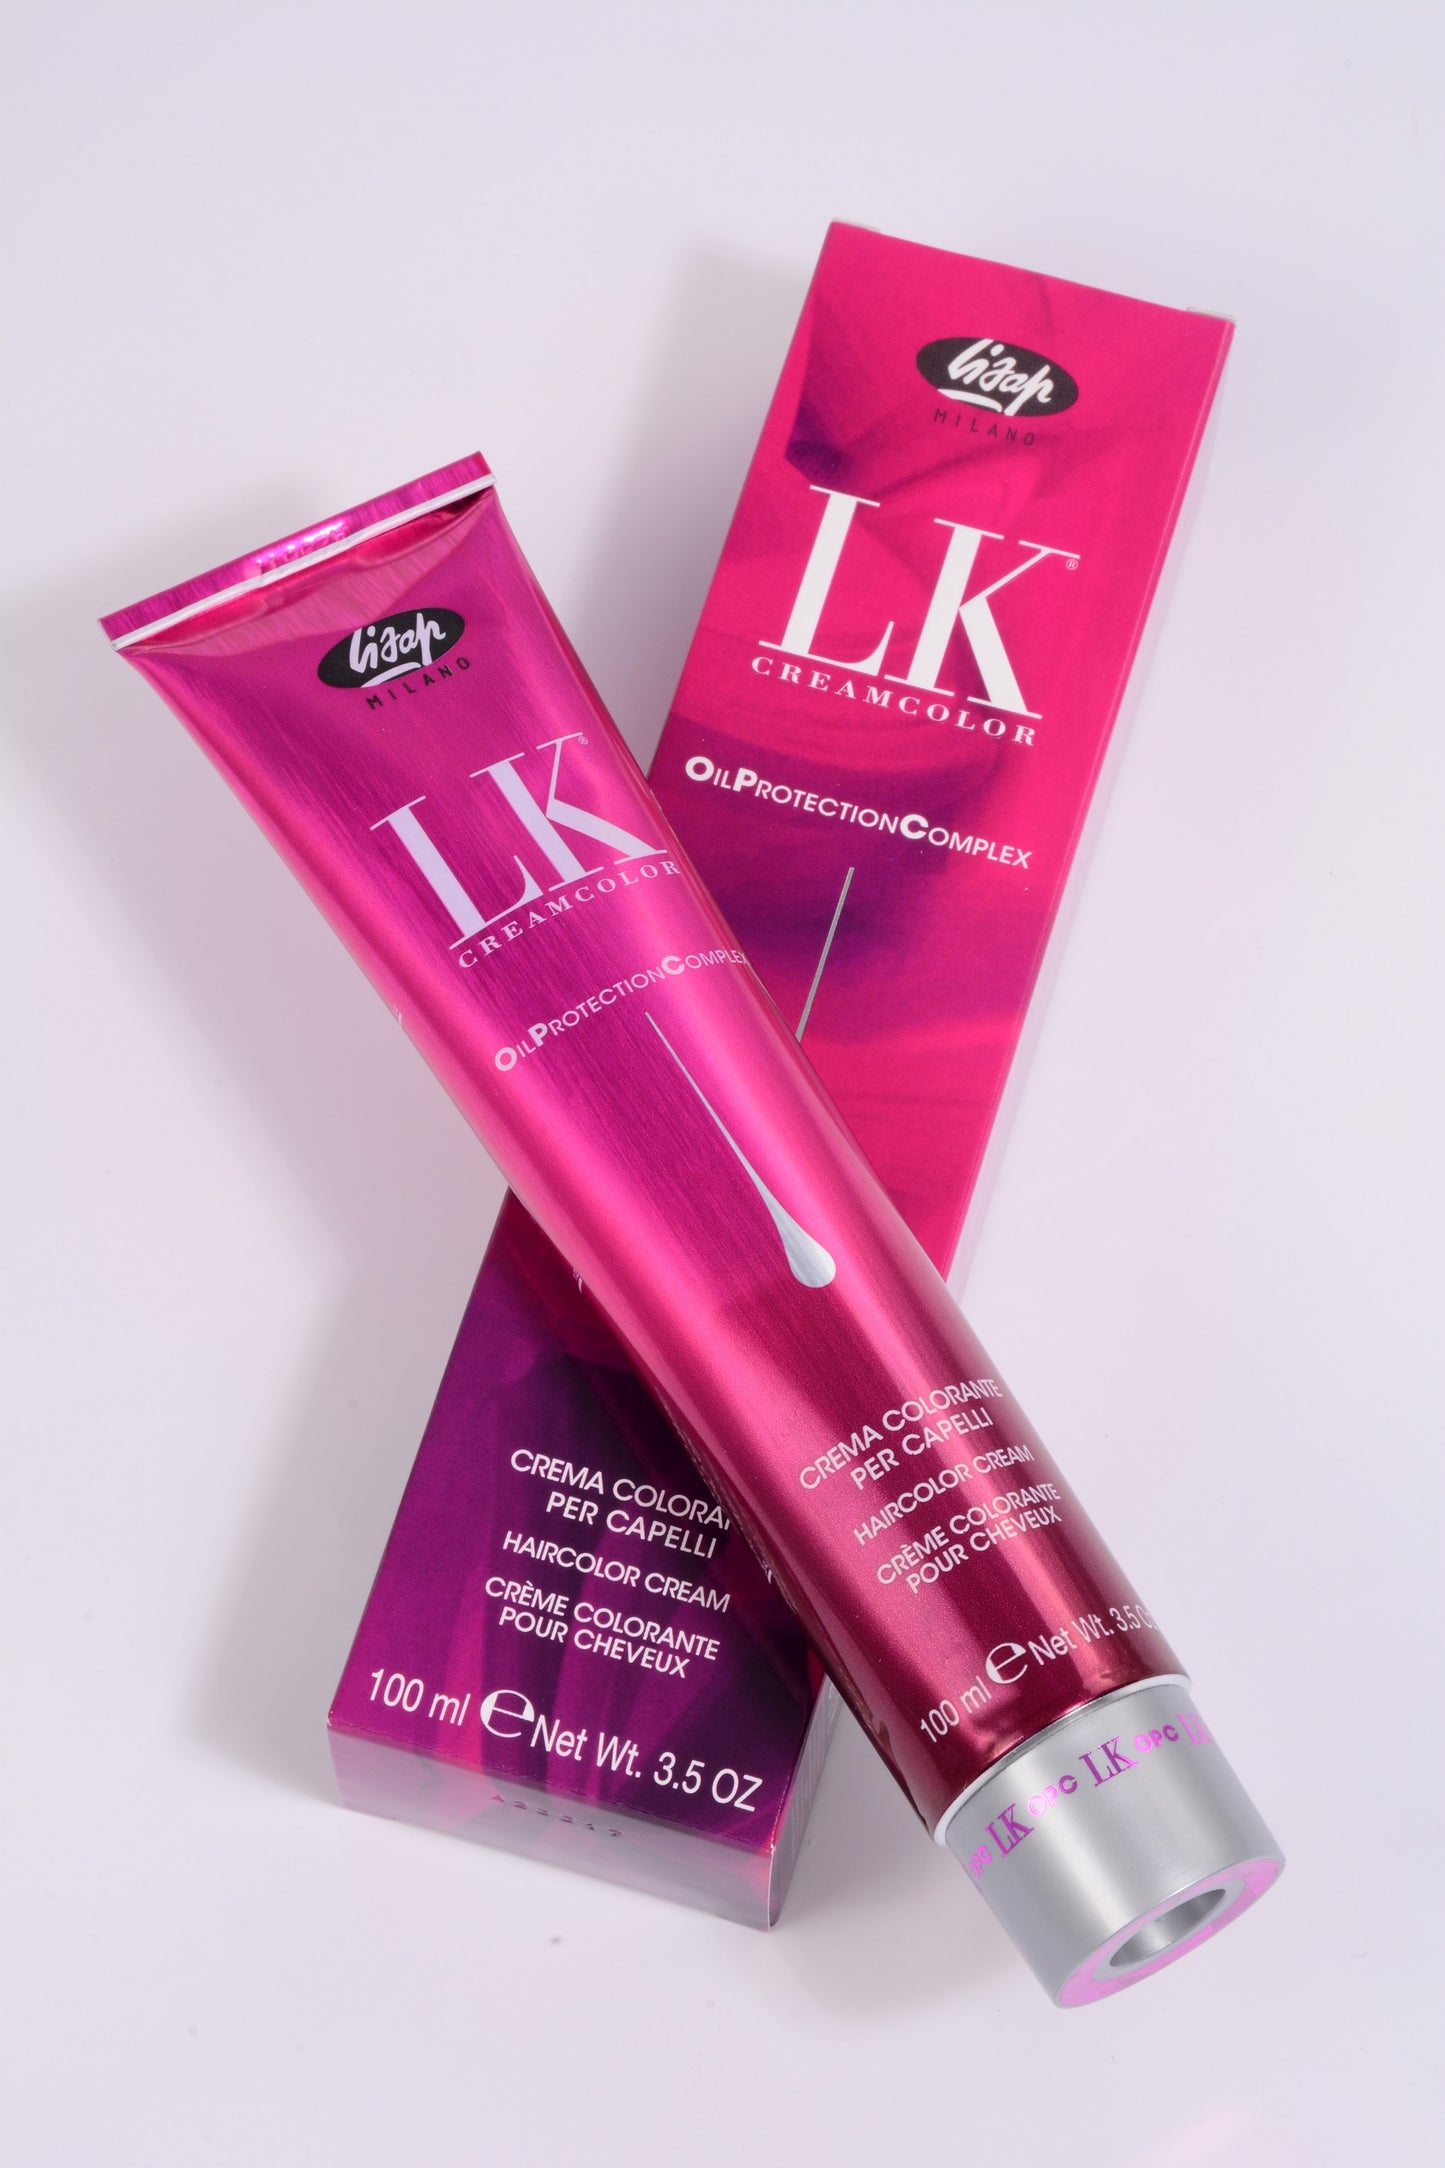 LK Creamcolor 10/2 Oil Protection Complex